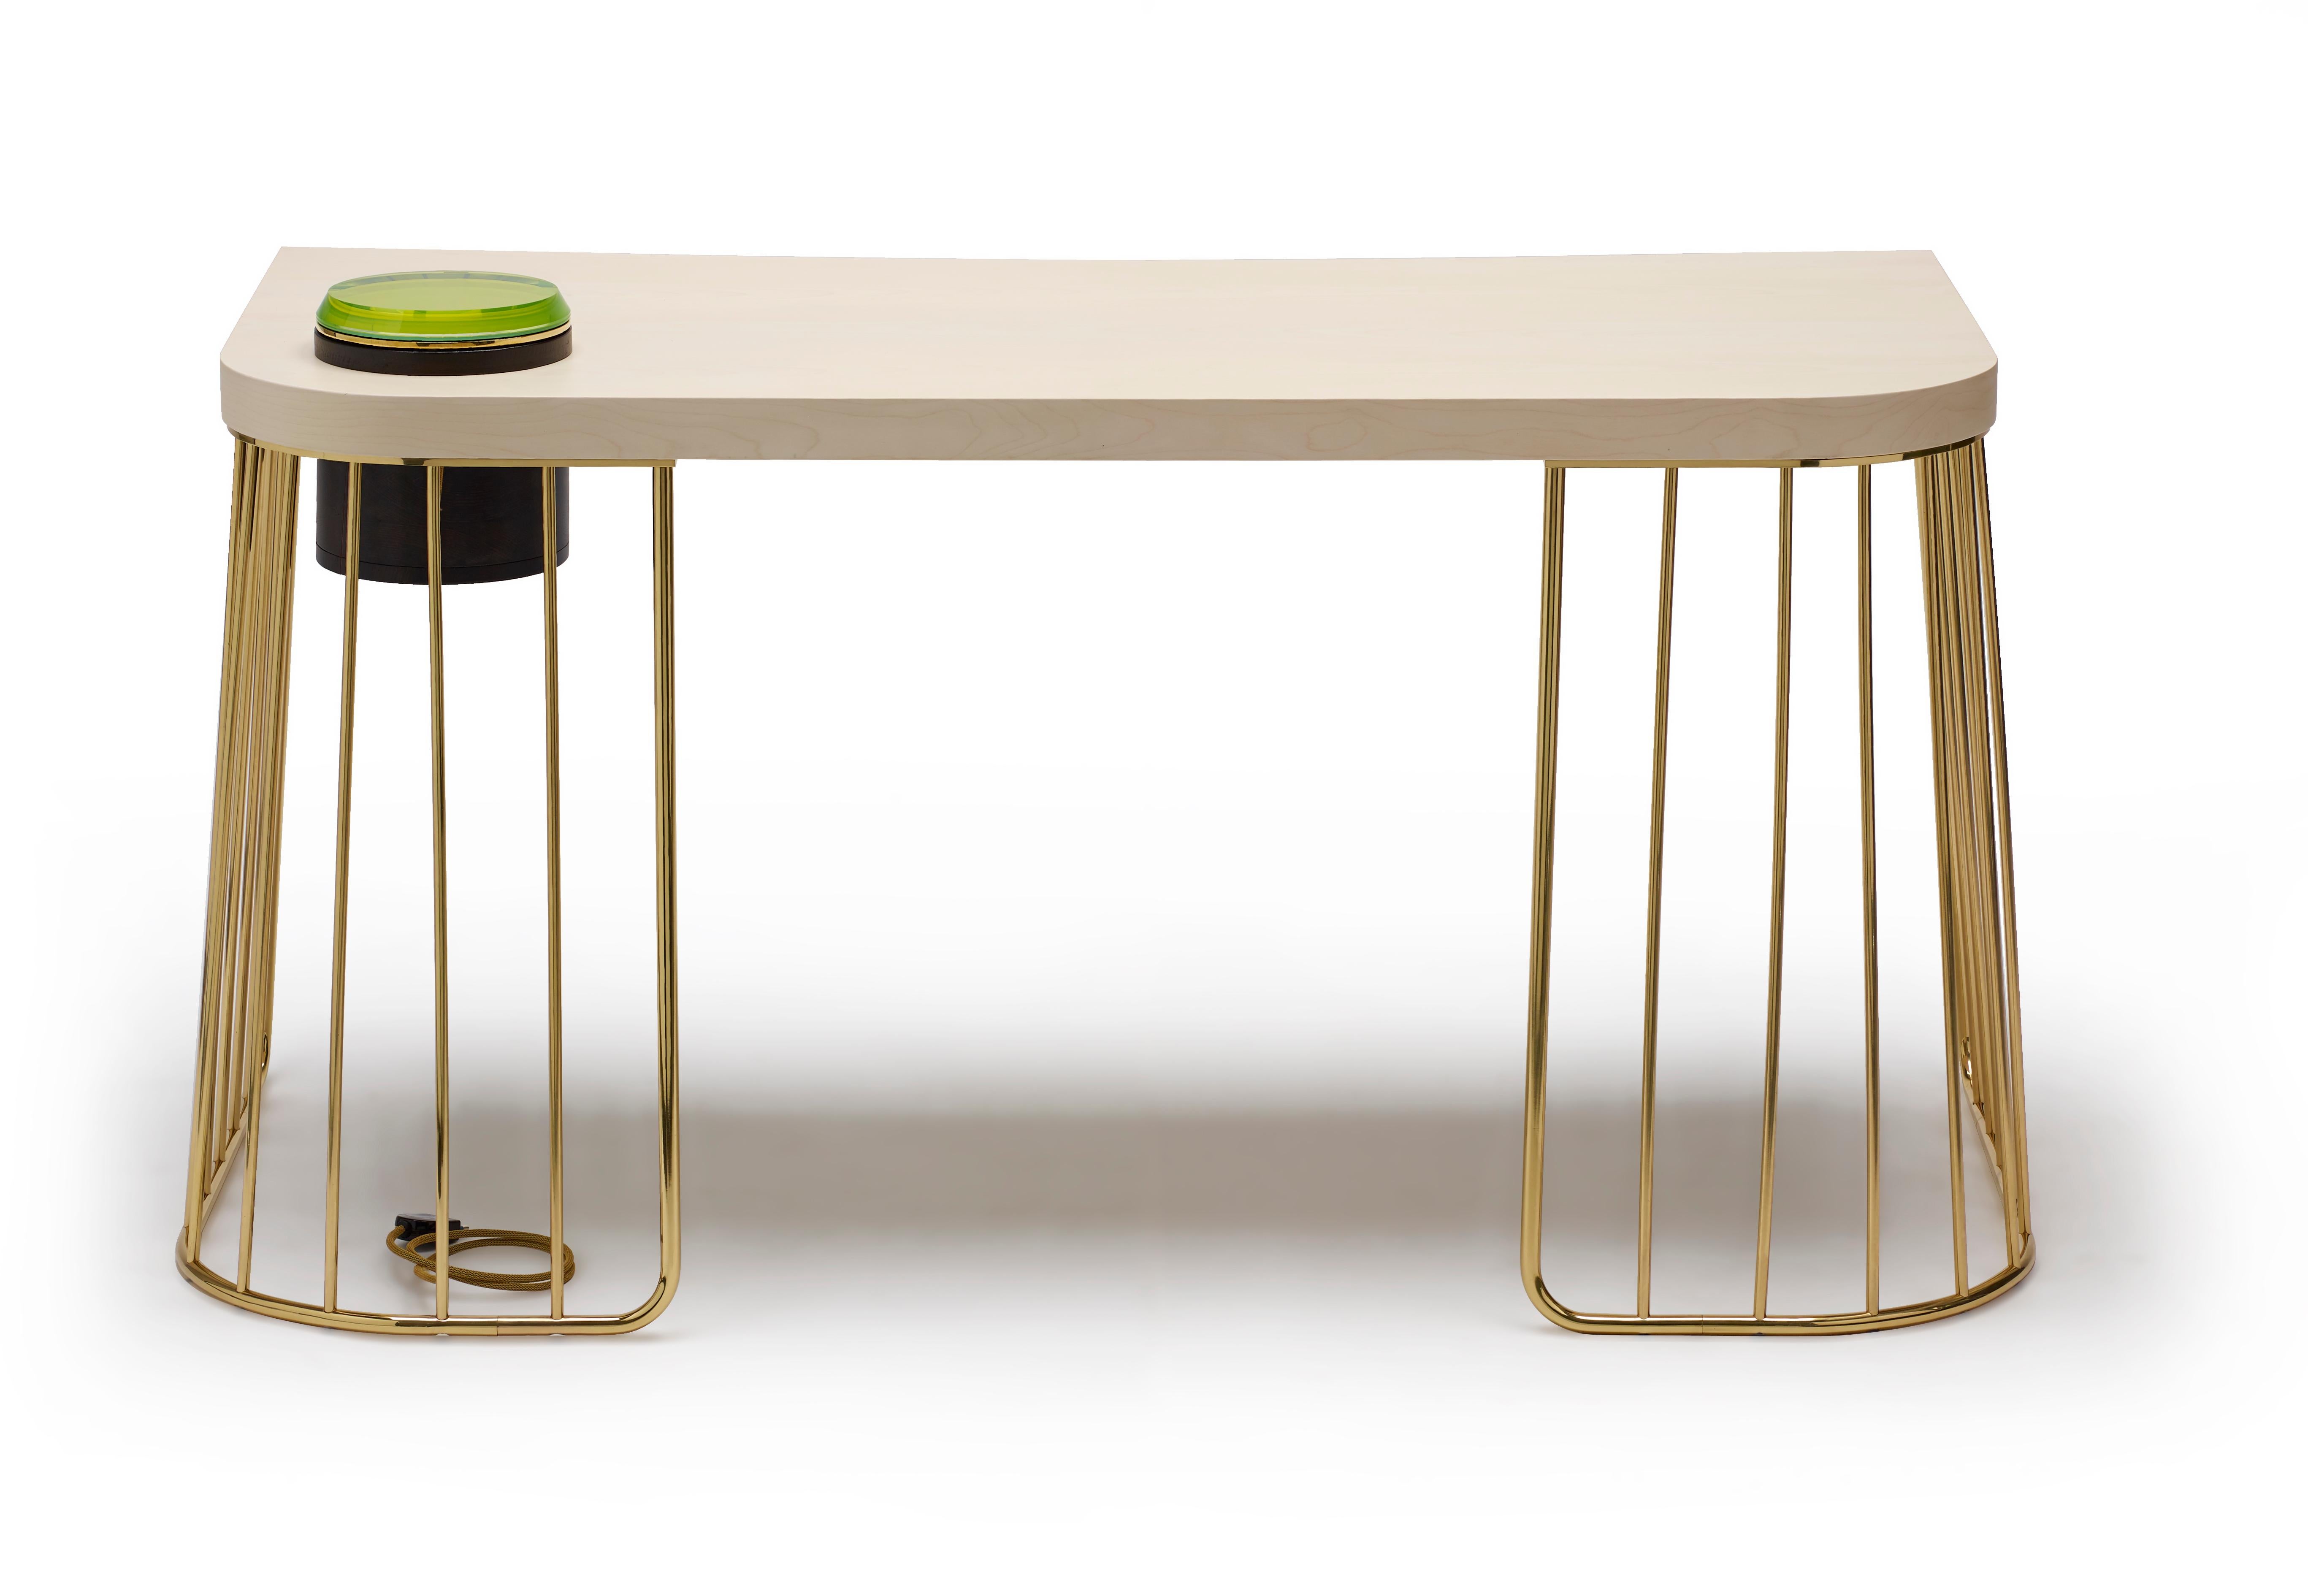 Elegant and decorative desk with incorporated hidden wiring system, to solve the problem of powering computer equipment or a light fixture on the desk.
Metal base in polished brass, top in wood material with bleached maple veneer. Desk designed